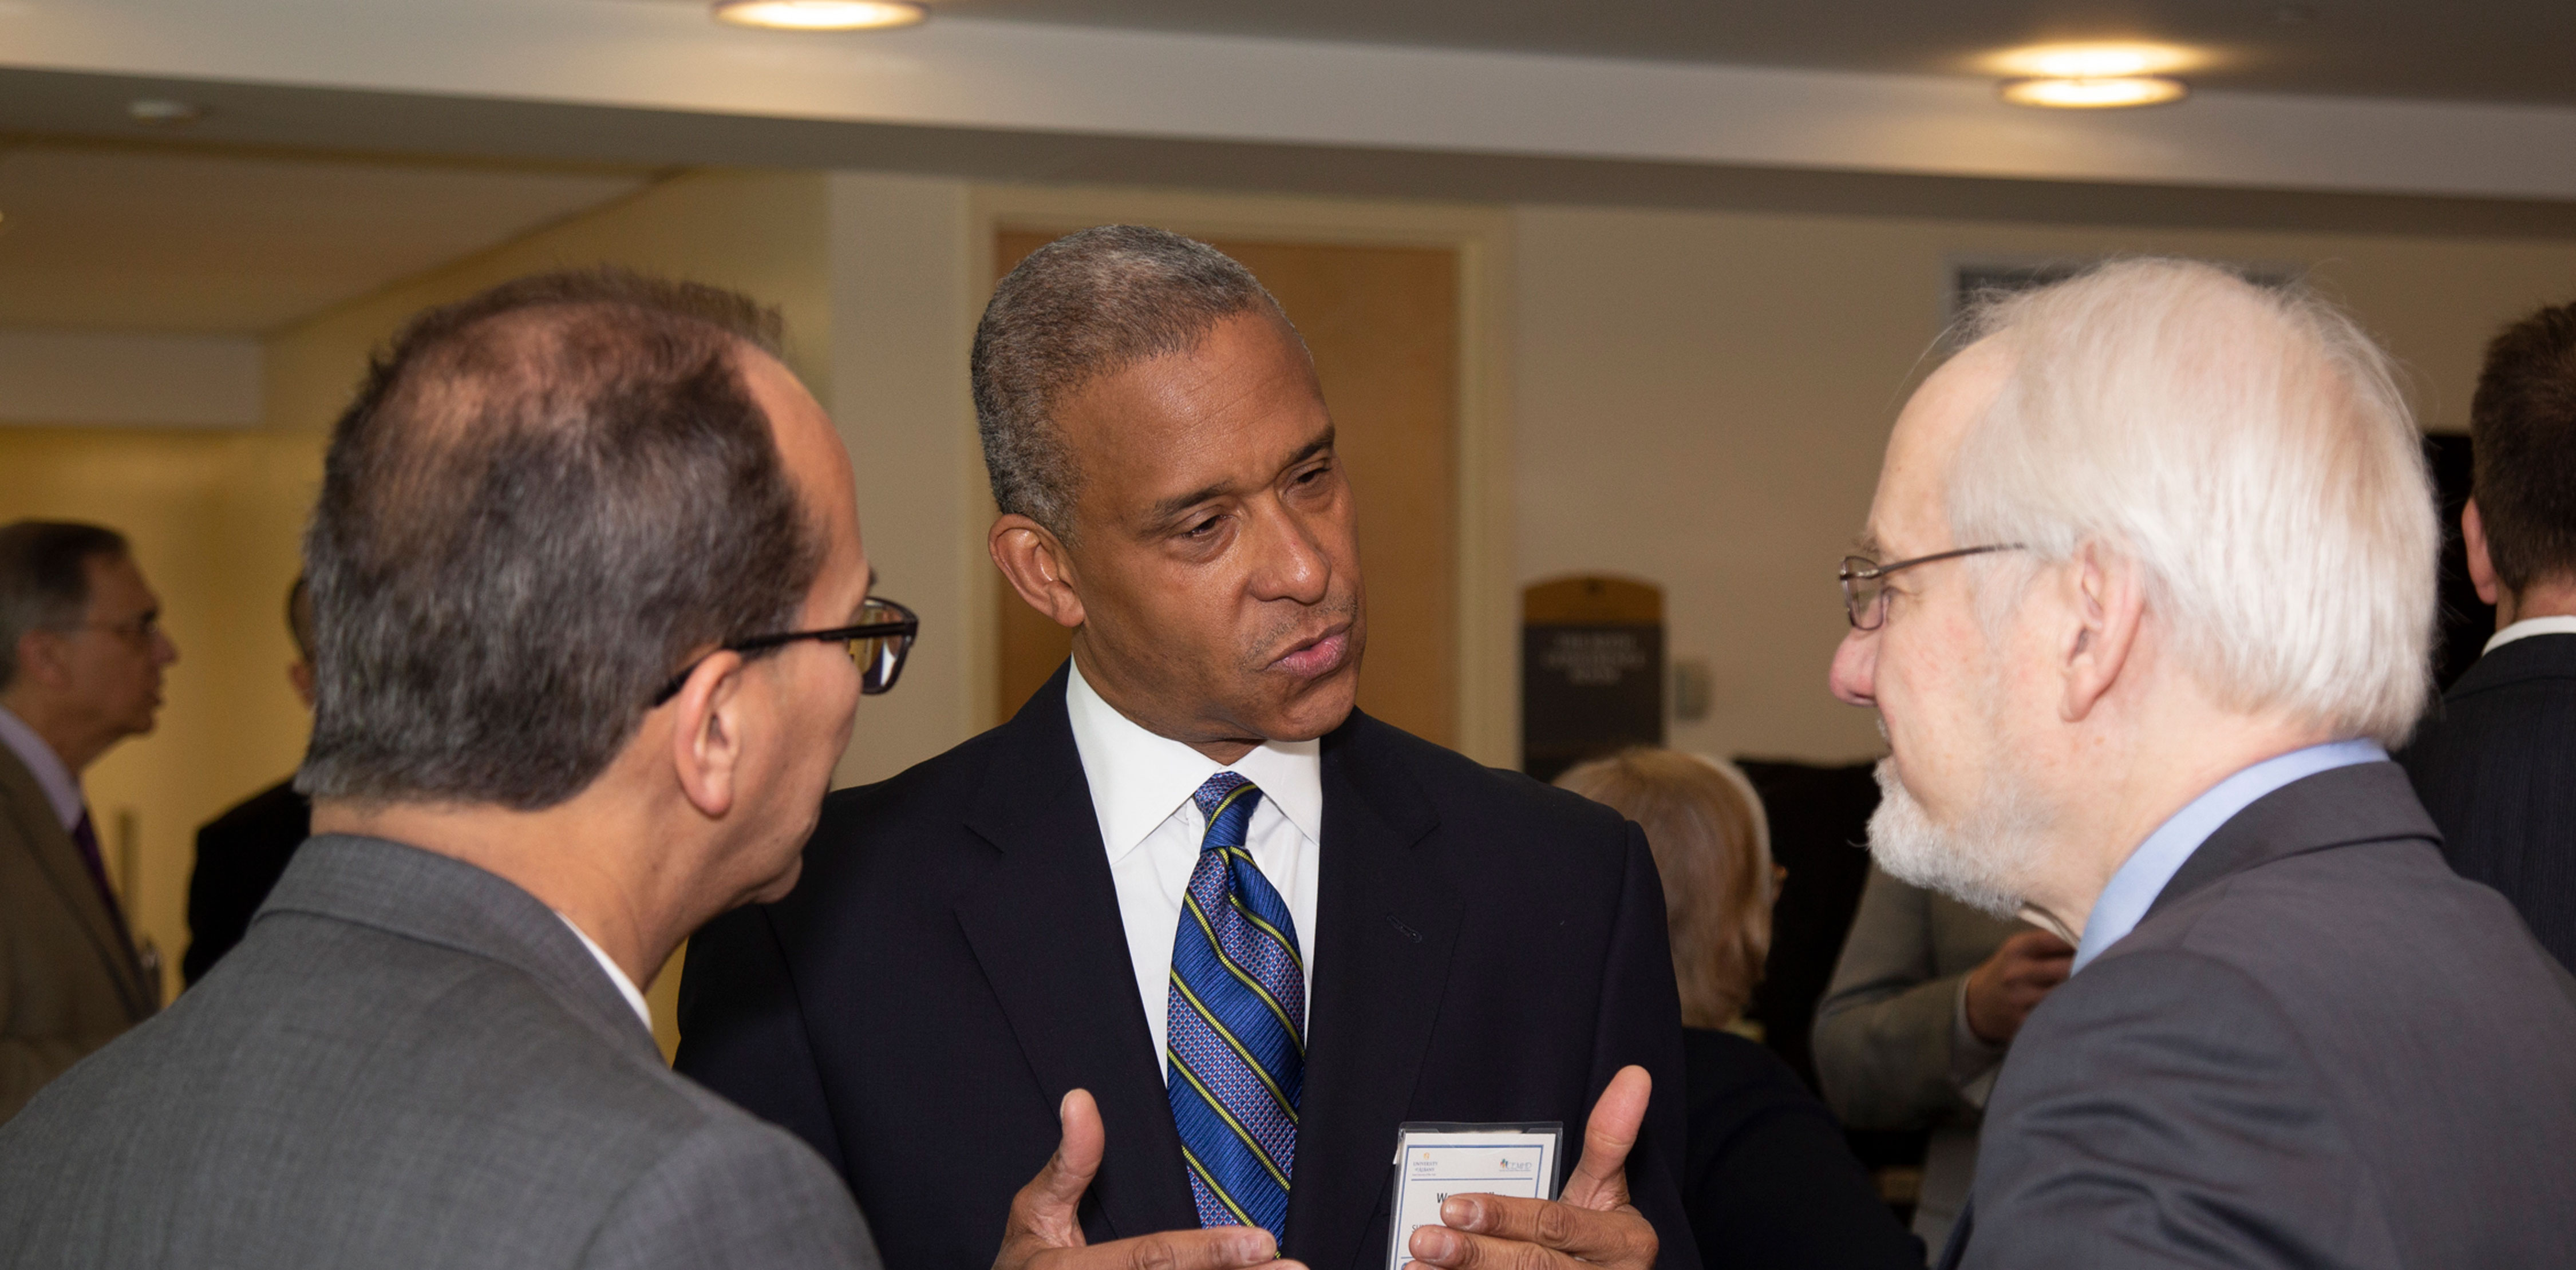 Three researchers converse at a CEMHD event.